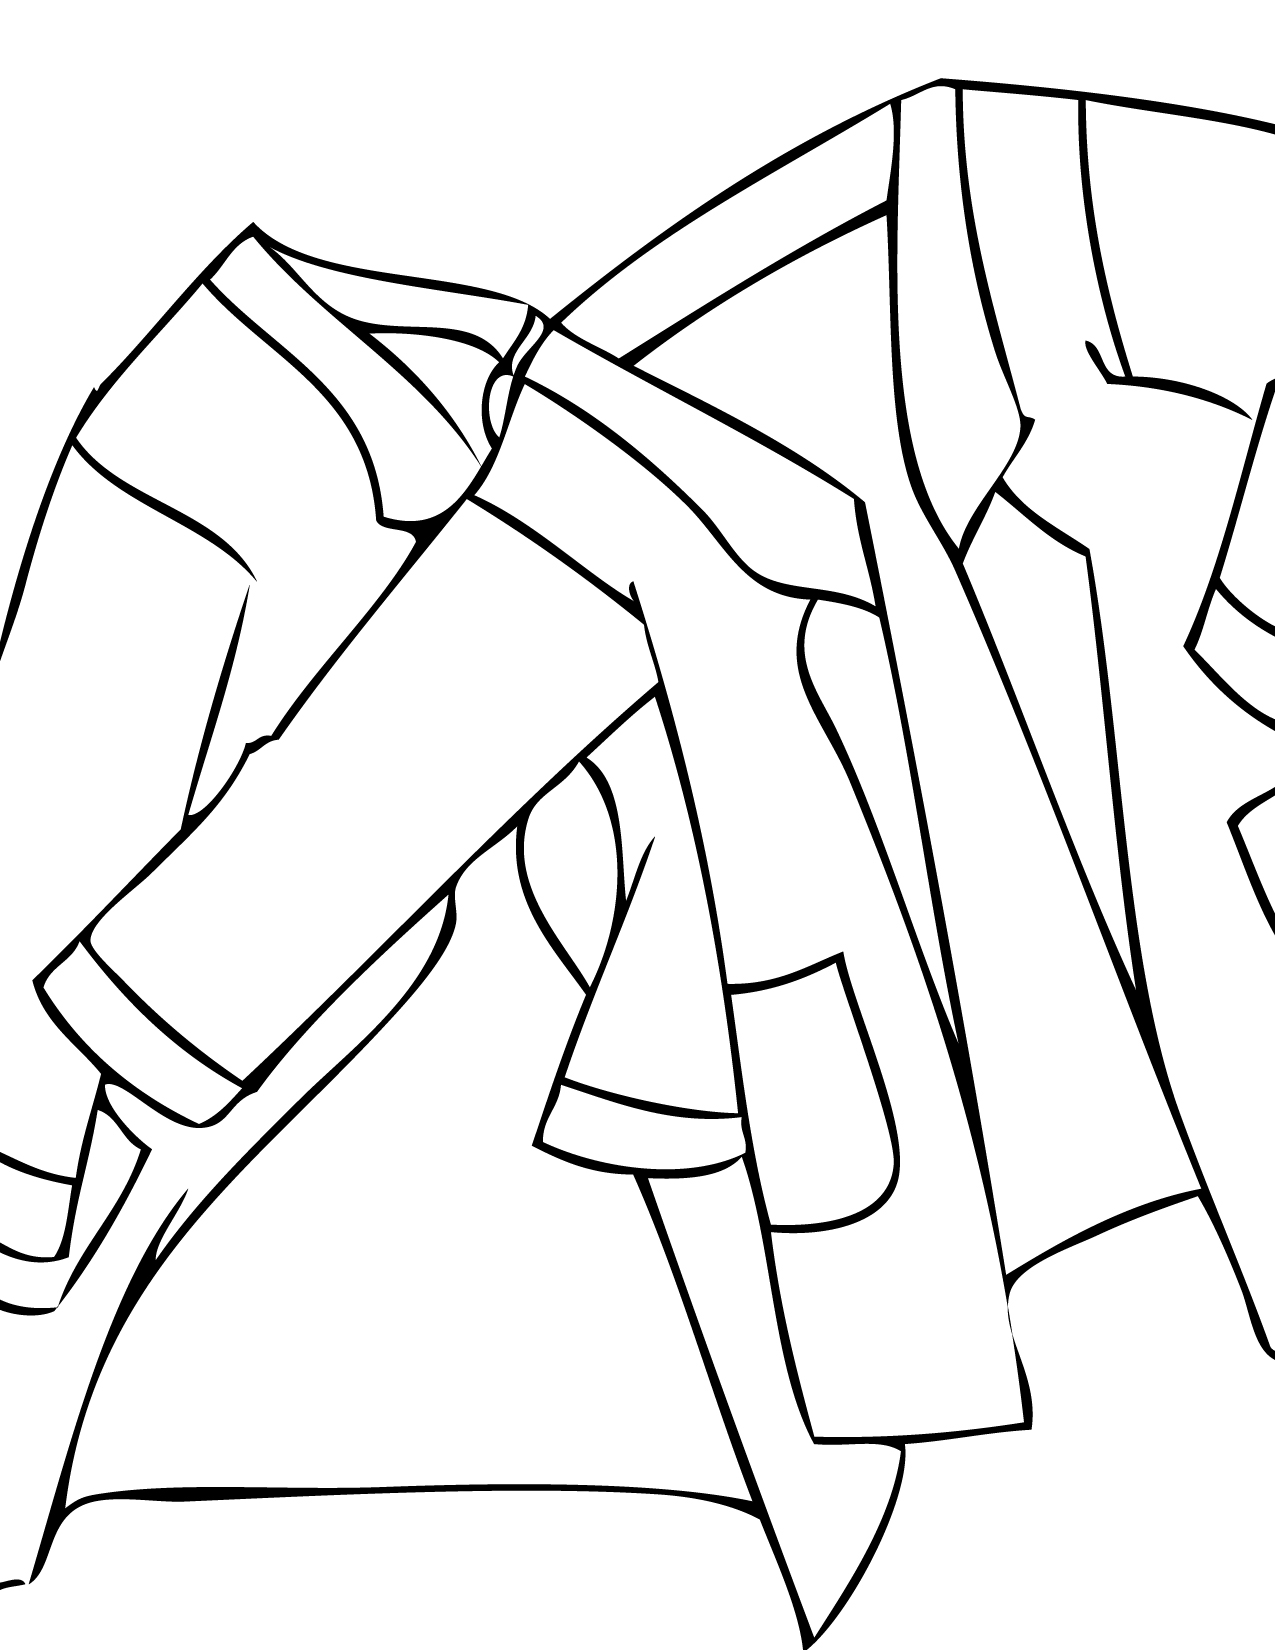 Coat Coloring Page at GetColorings.com | Free printable colorings pages ...